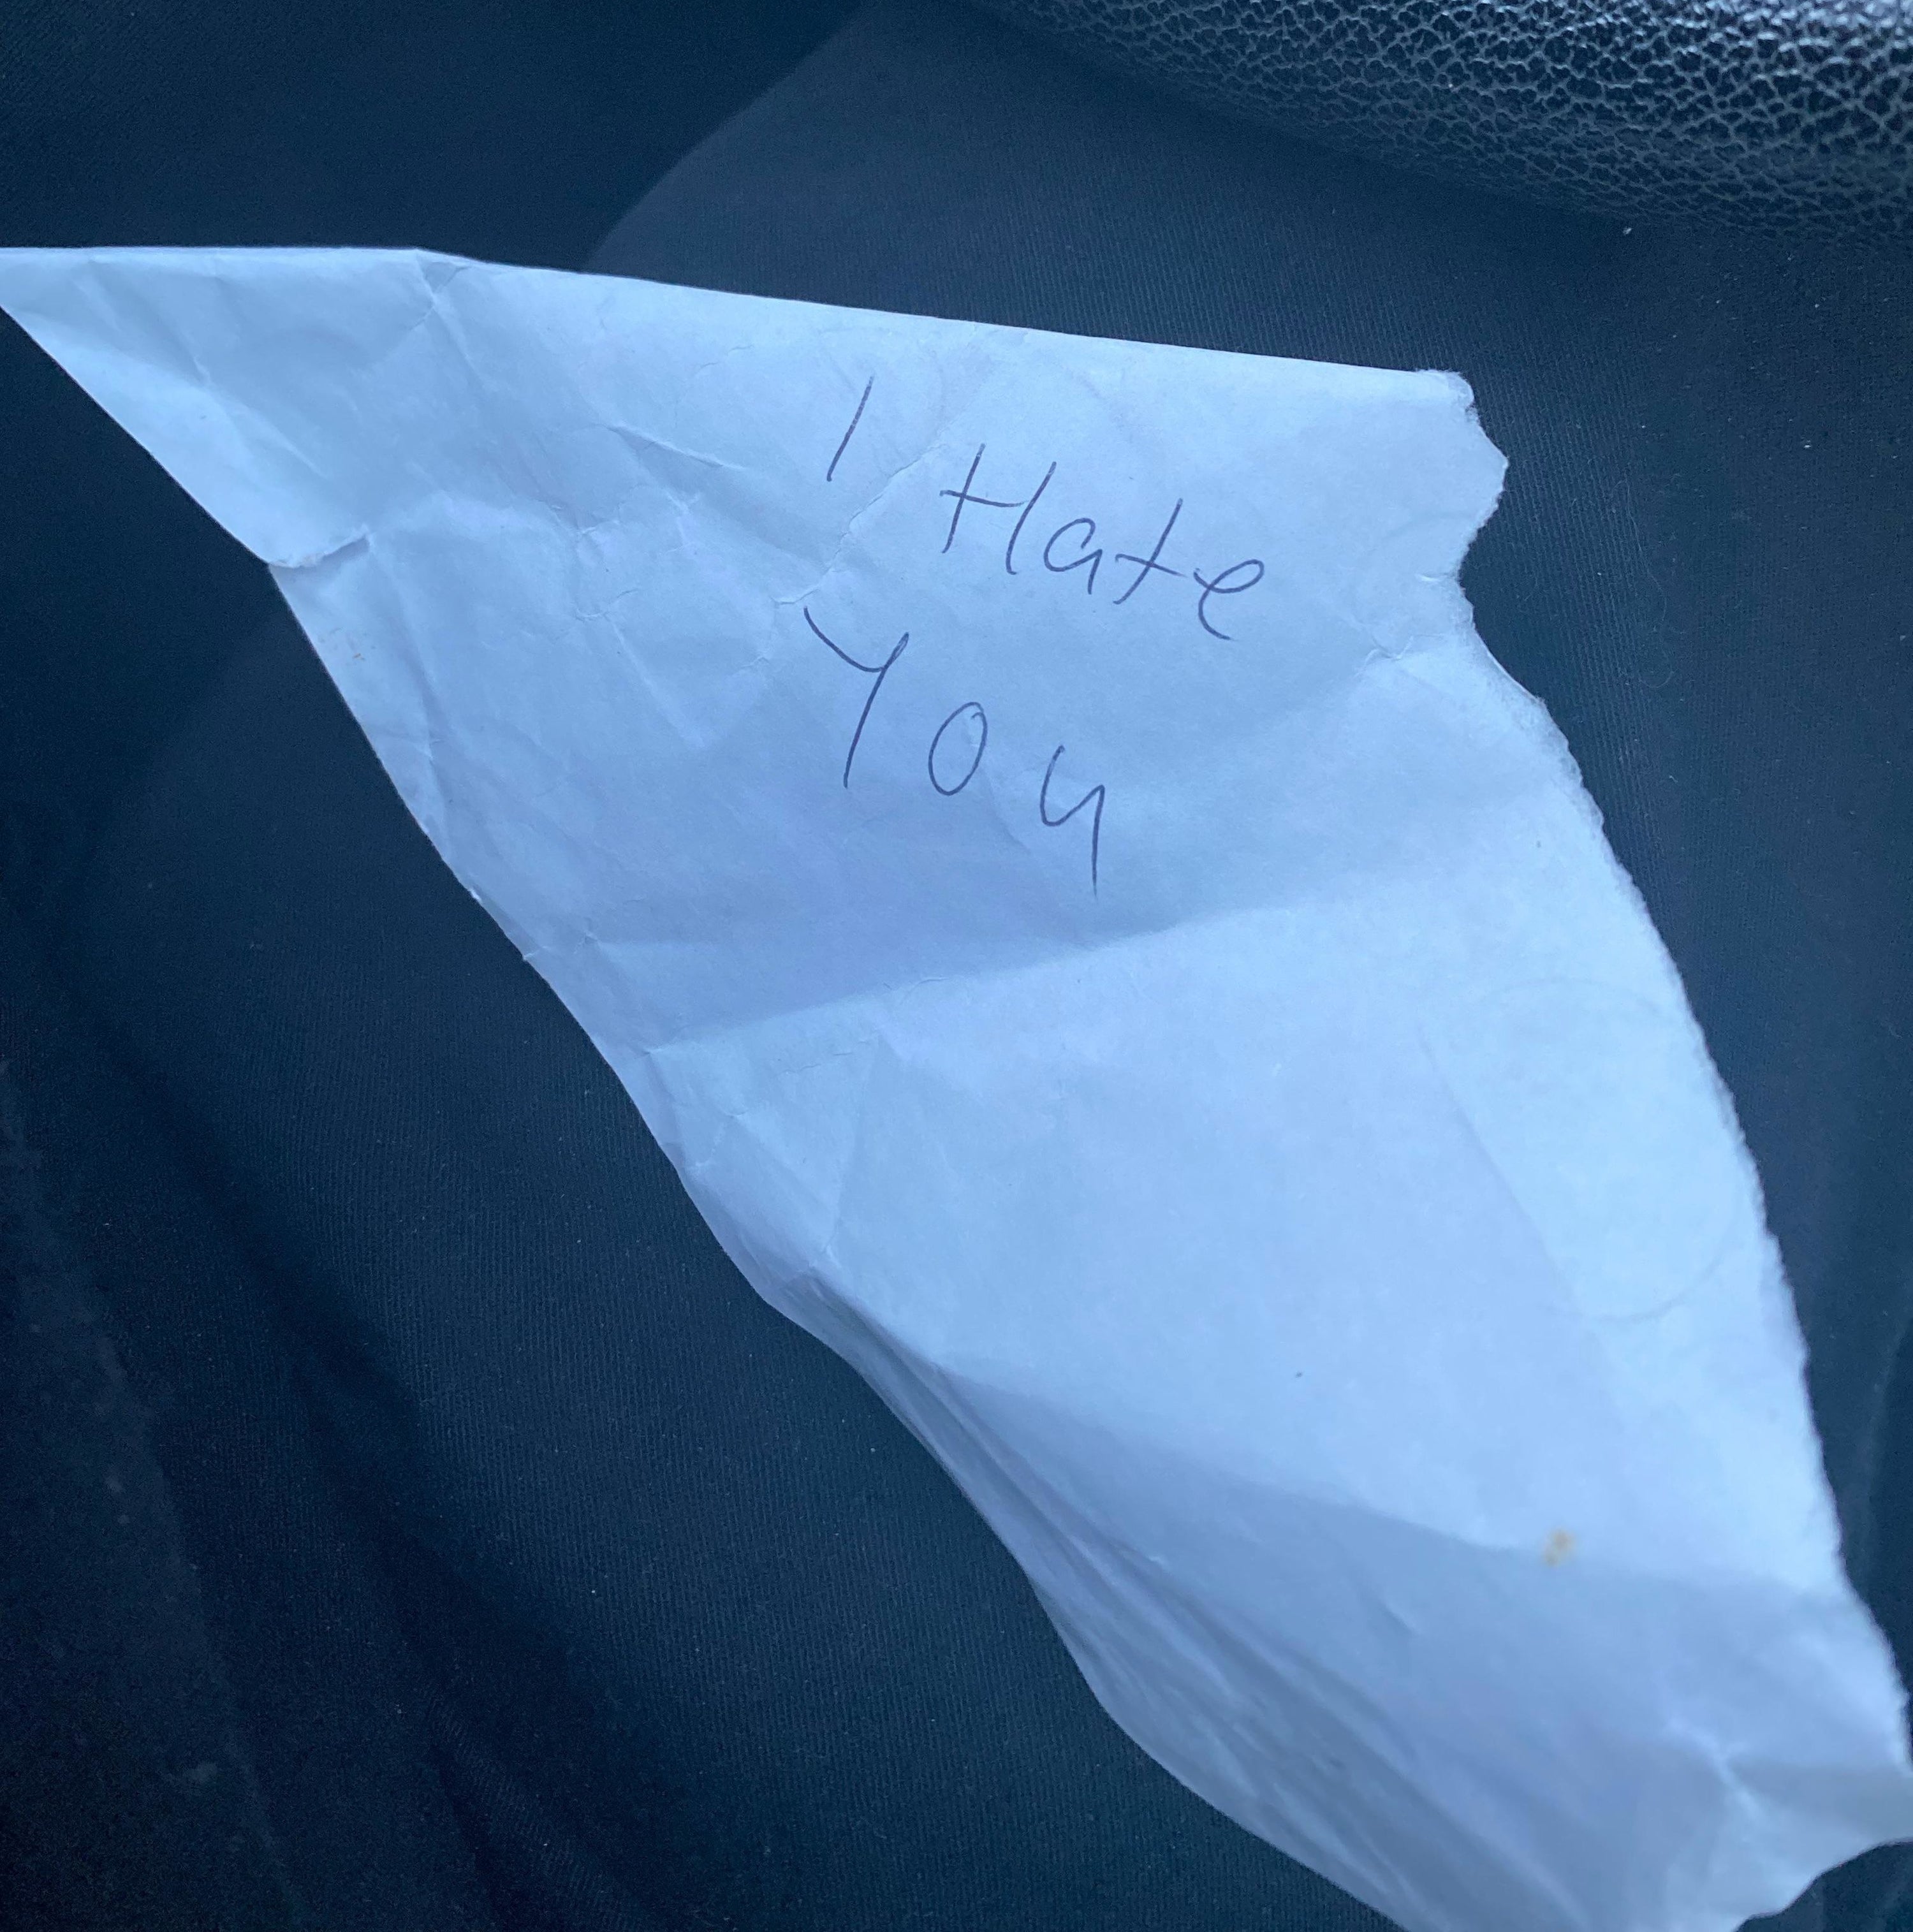 A note that says &quot;I hate you&quot;